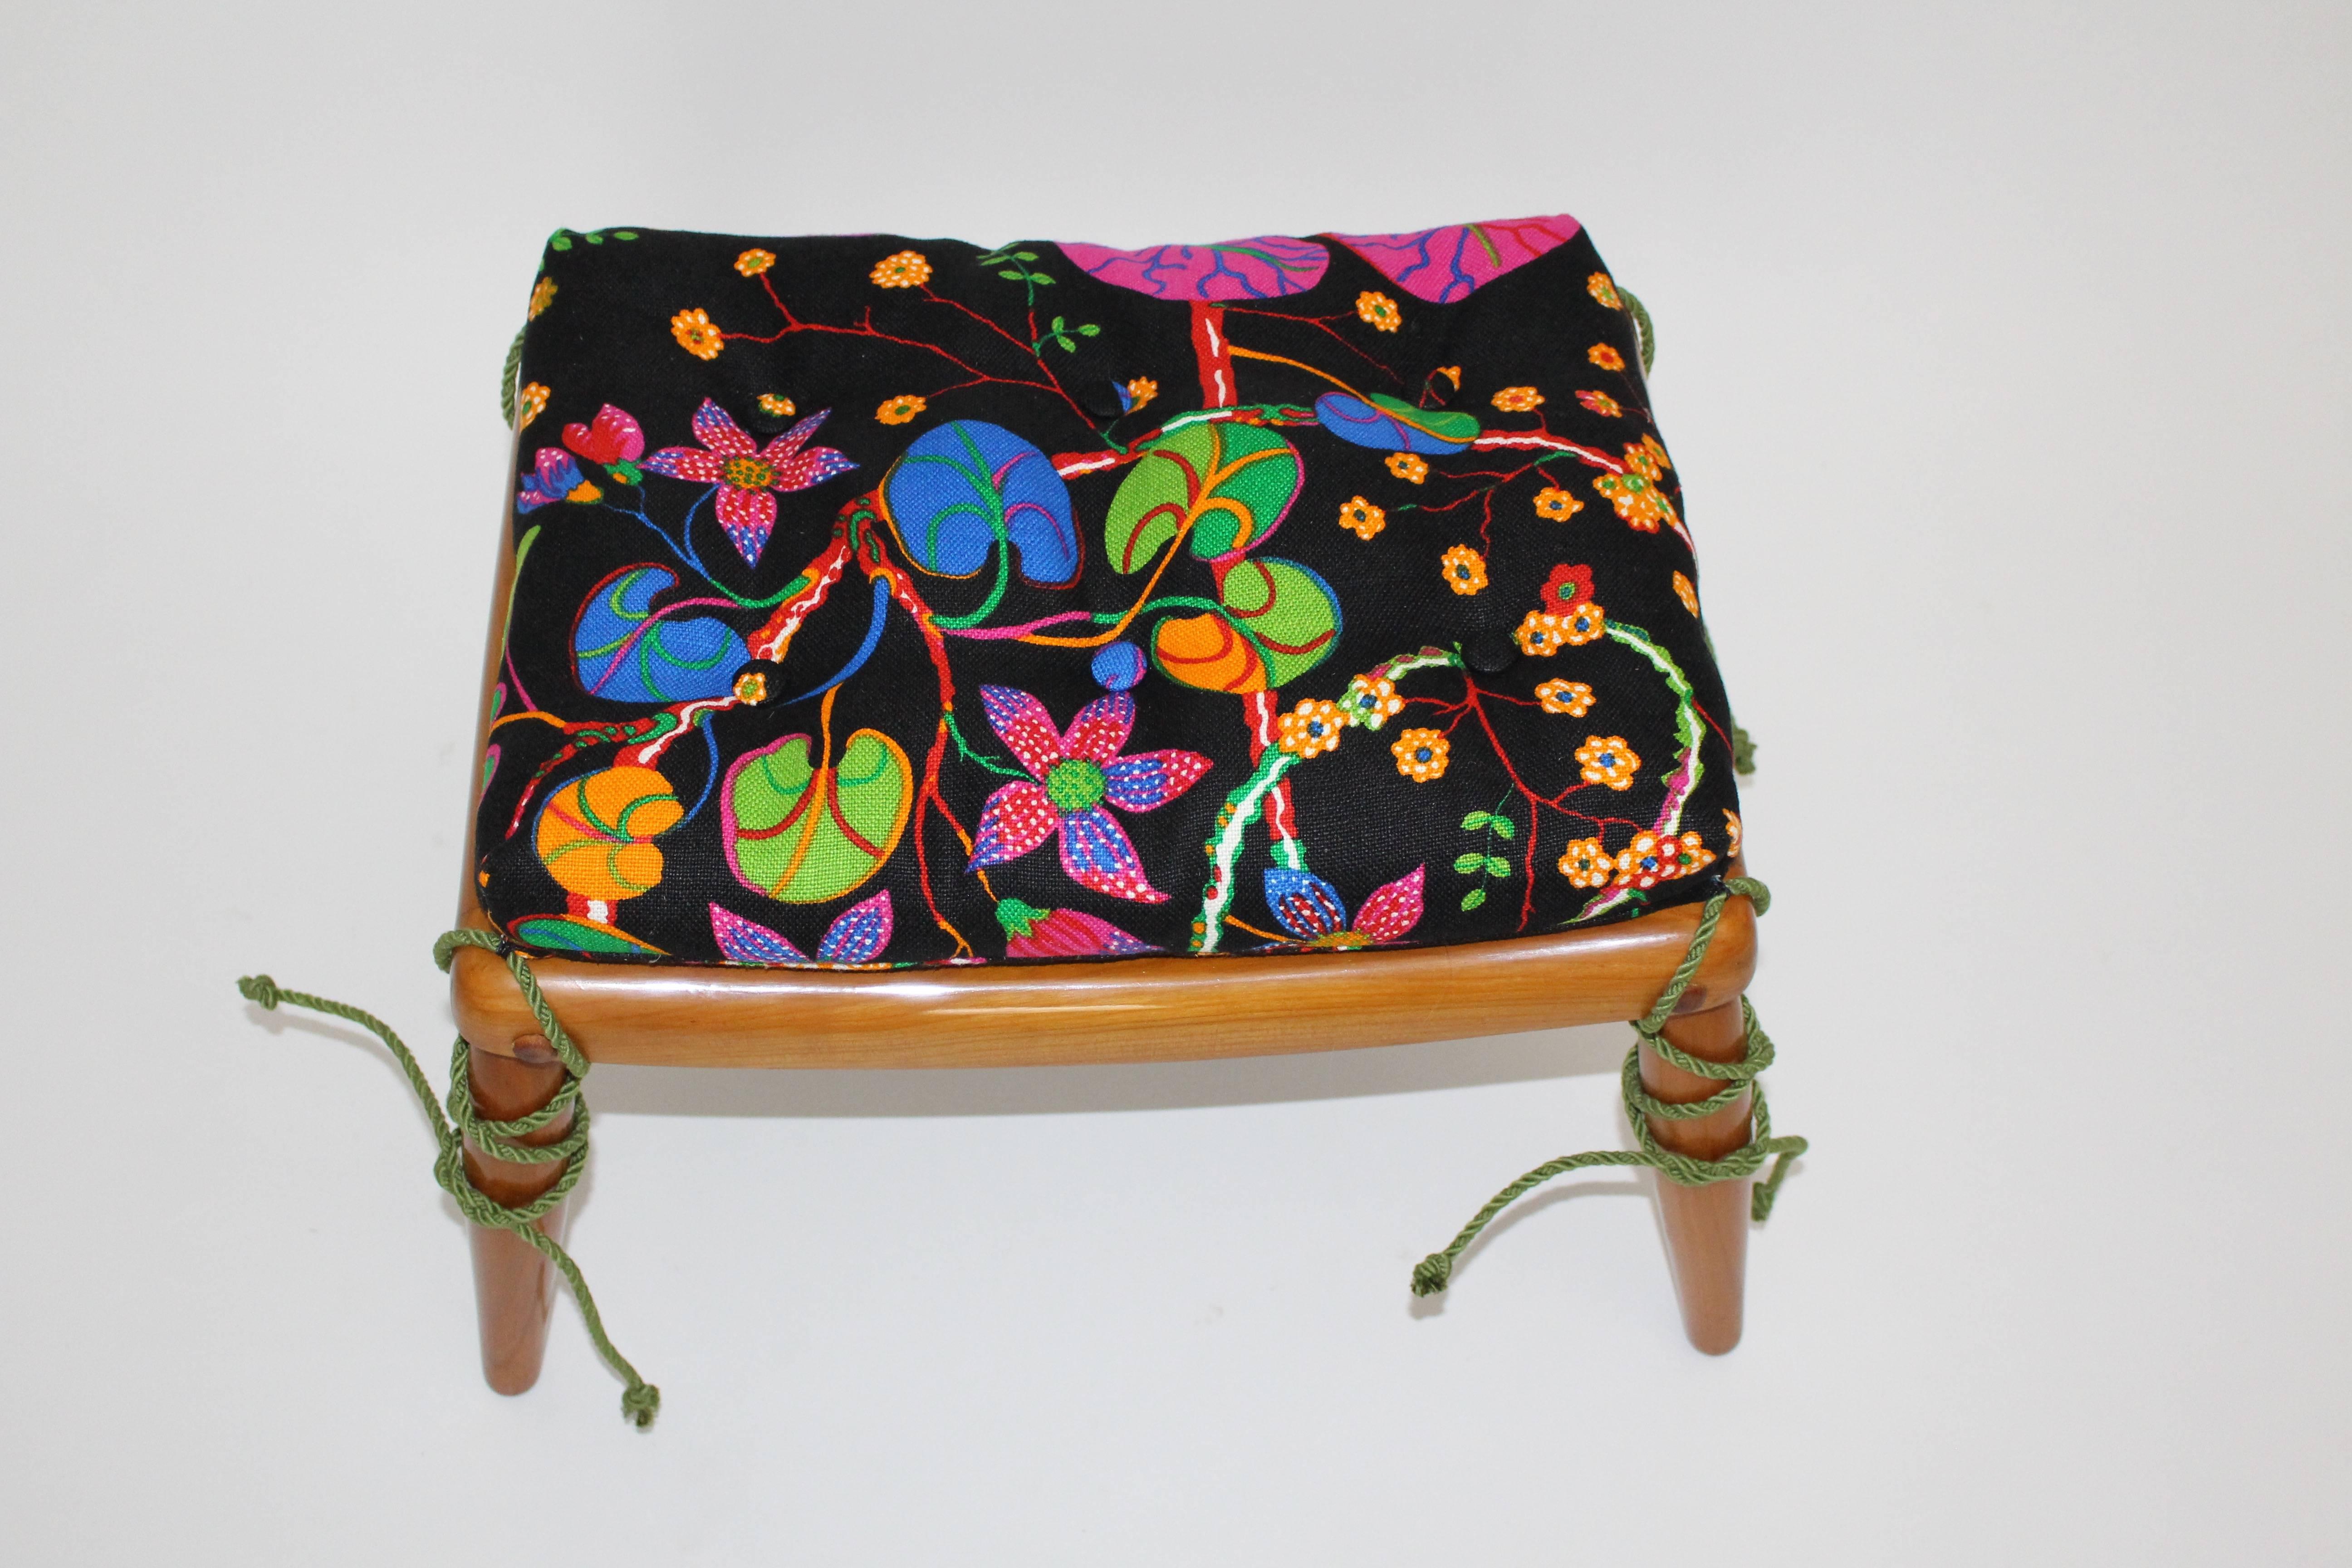 Beechwood Vintage Stool Multicolored Josef Frank Cushion by Anna Lülja Praun In Good Condition For Sale In Vienna, AT